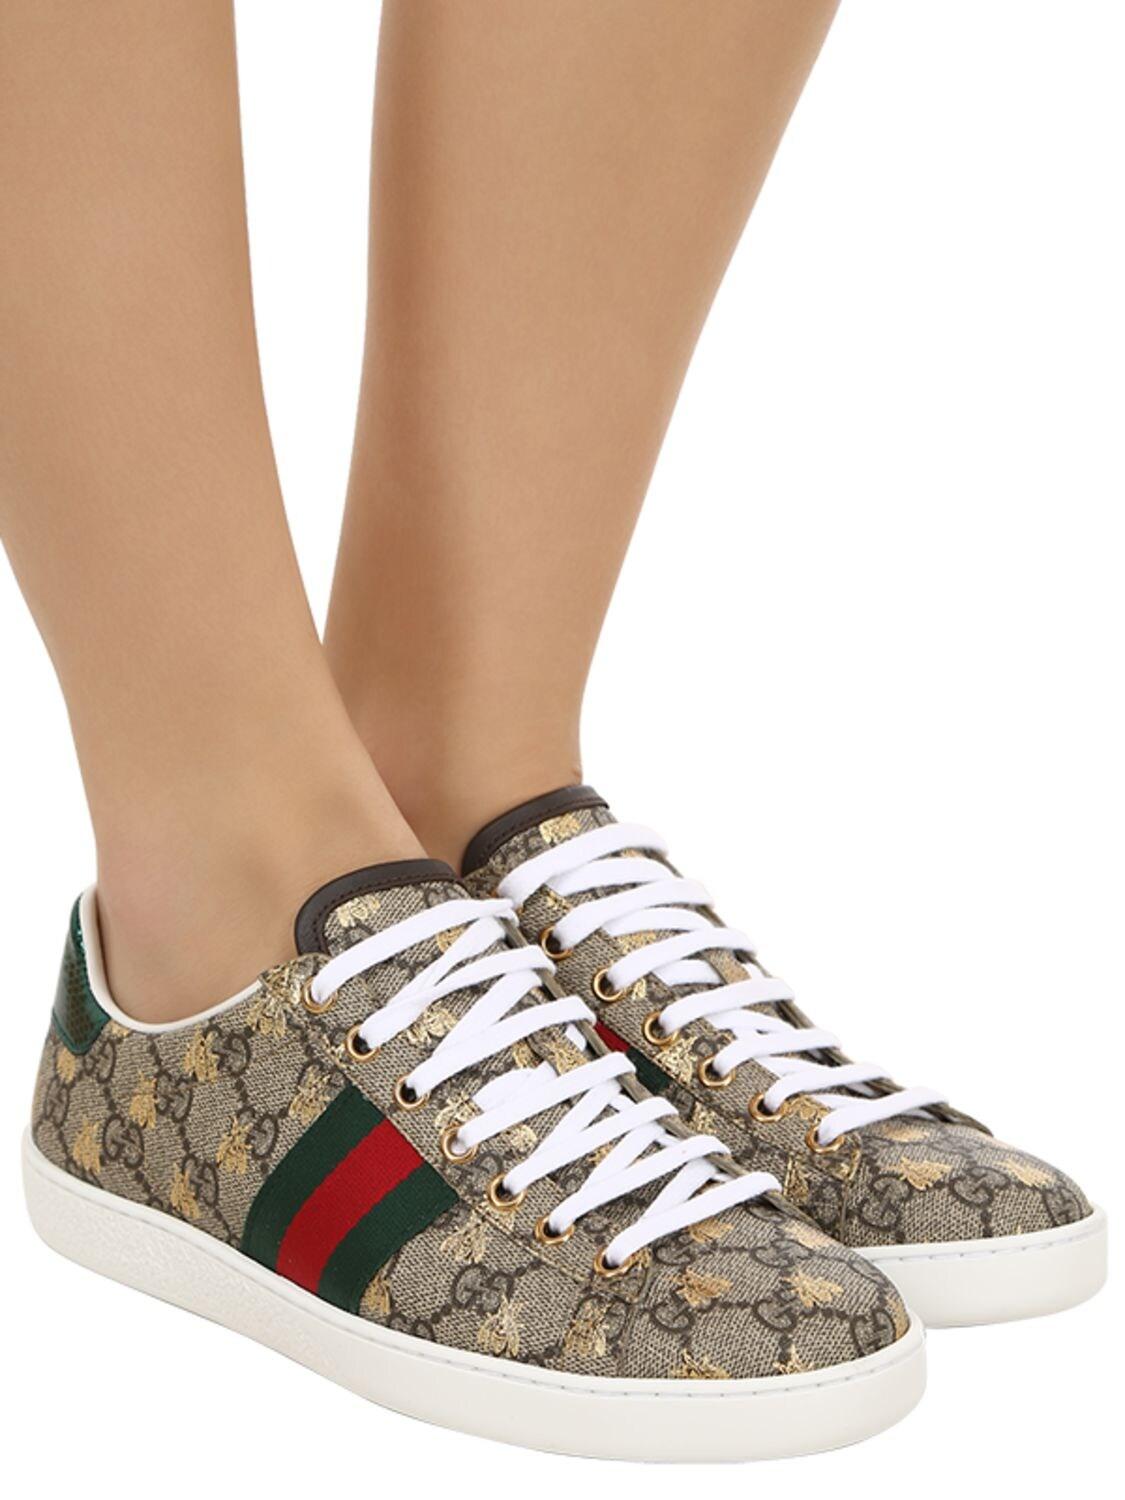 Gucci Gg Canvas New Ace Sneakes in Beige (Natural) - Save 45% | Lyst